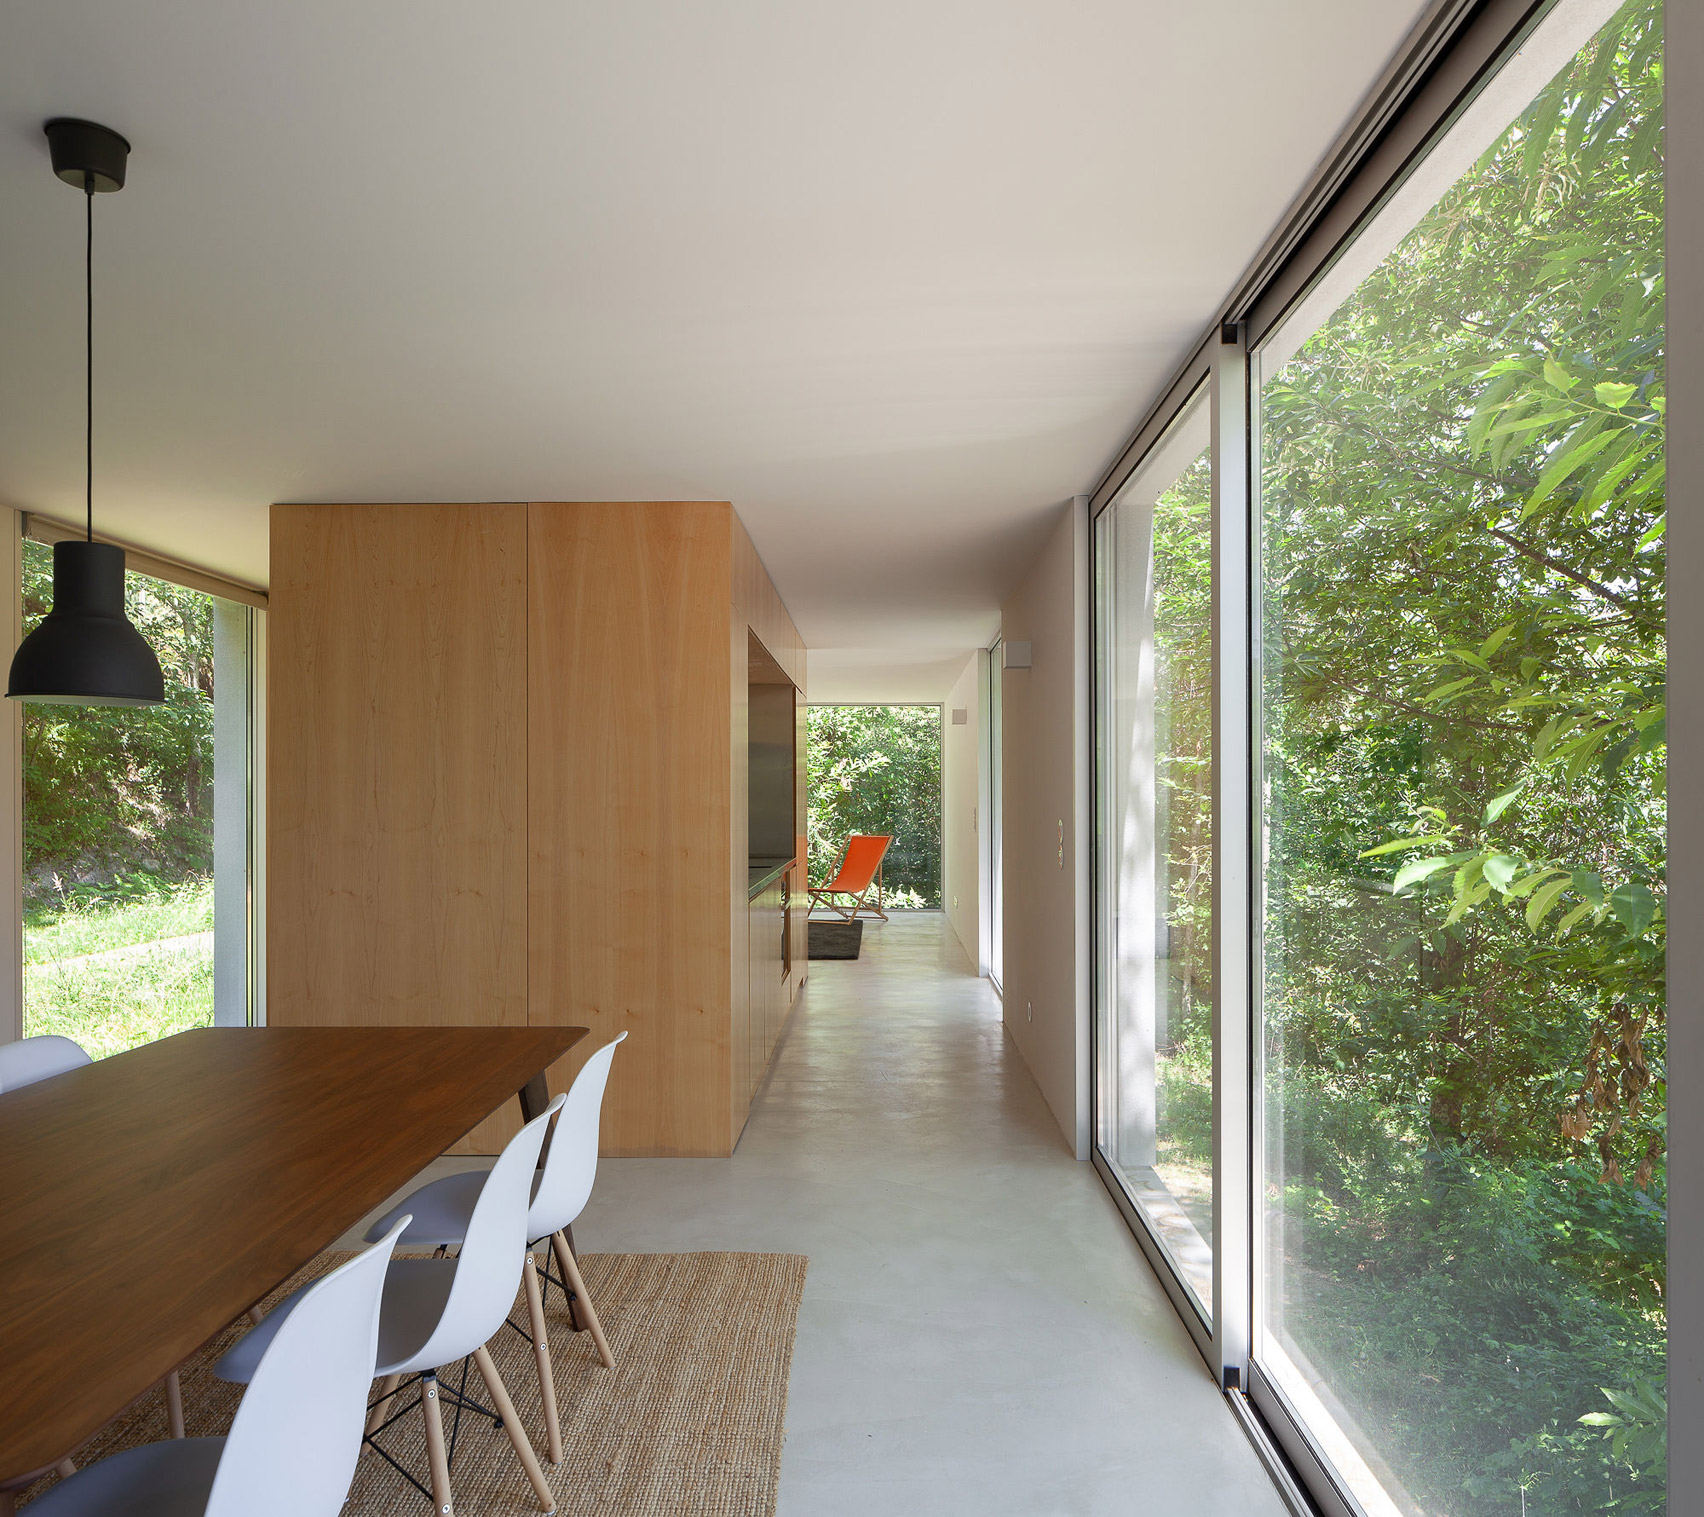 Interiors of Forja House by Pablo Pita Architects